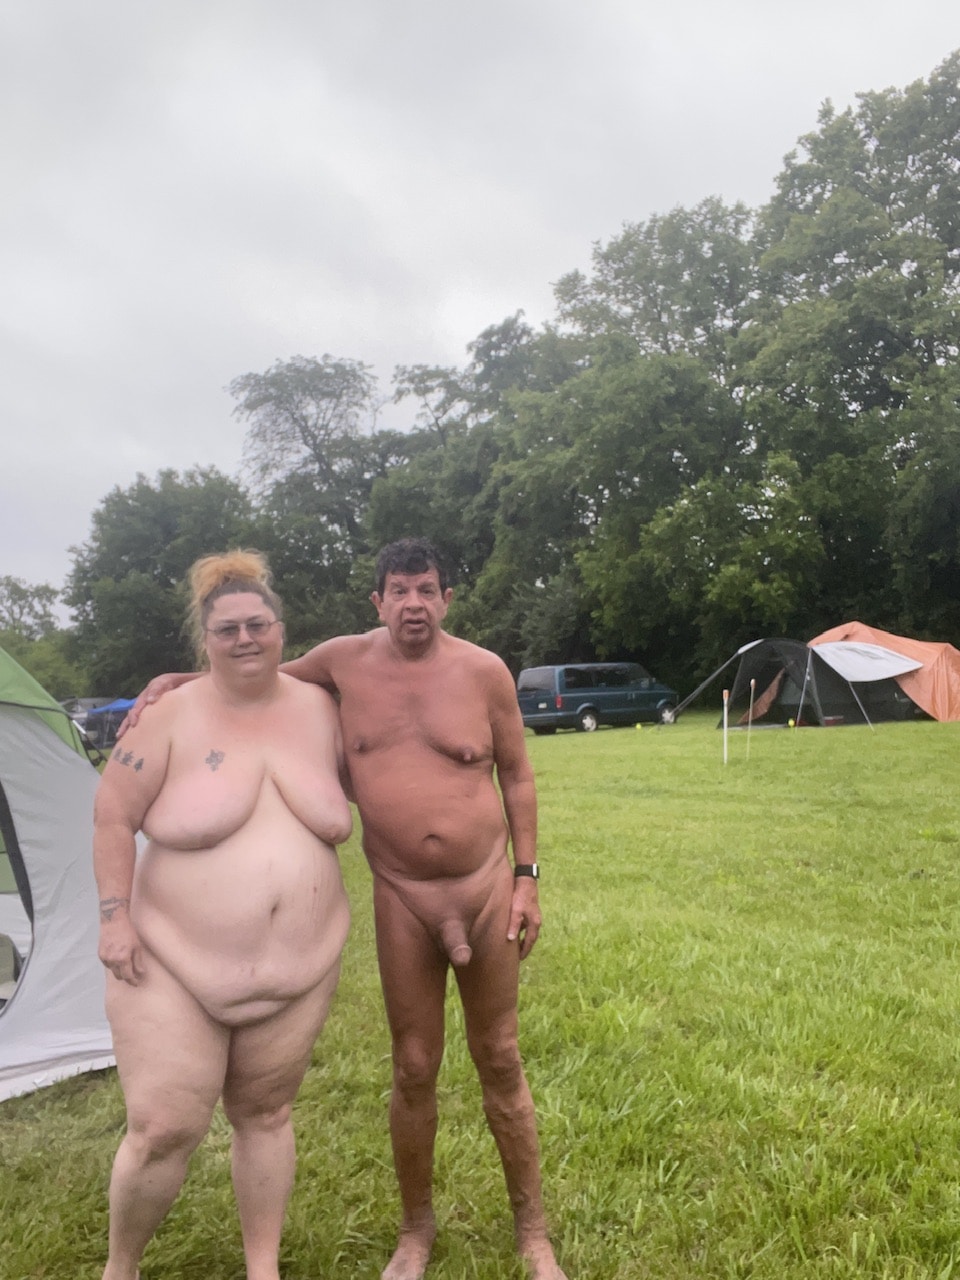 sudan nude pics - We love camping in the nude - Real Amateurs